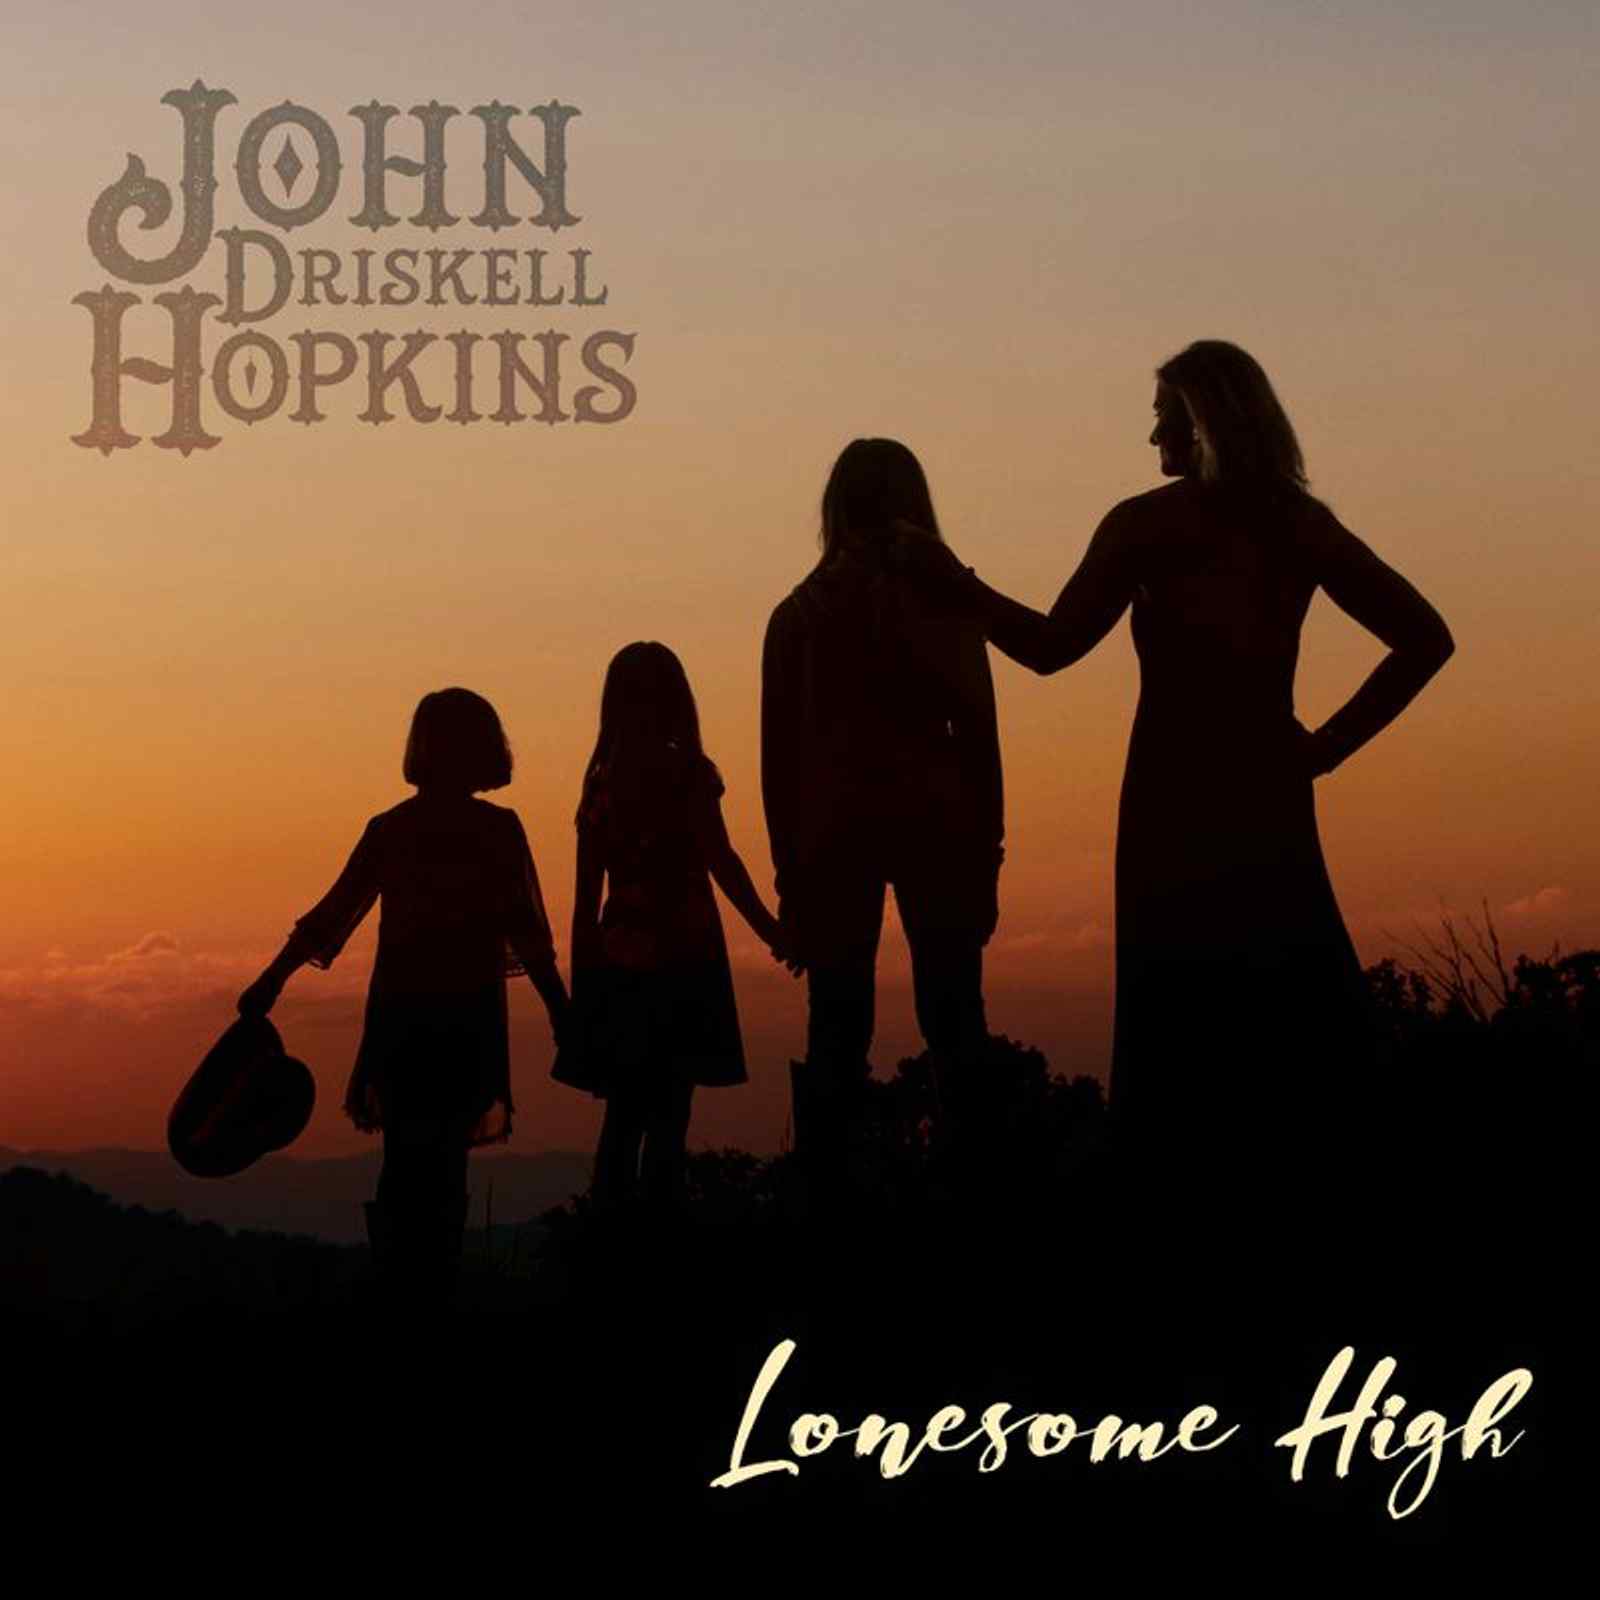 Lonesome High by John Driskell Hopkins